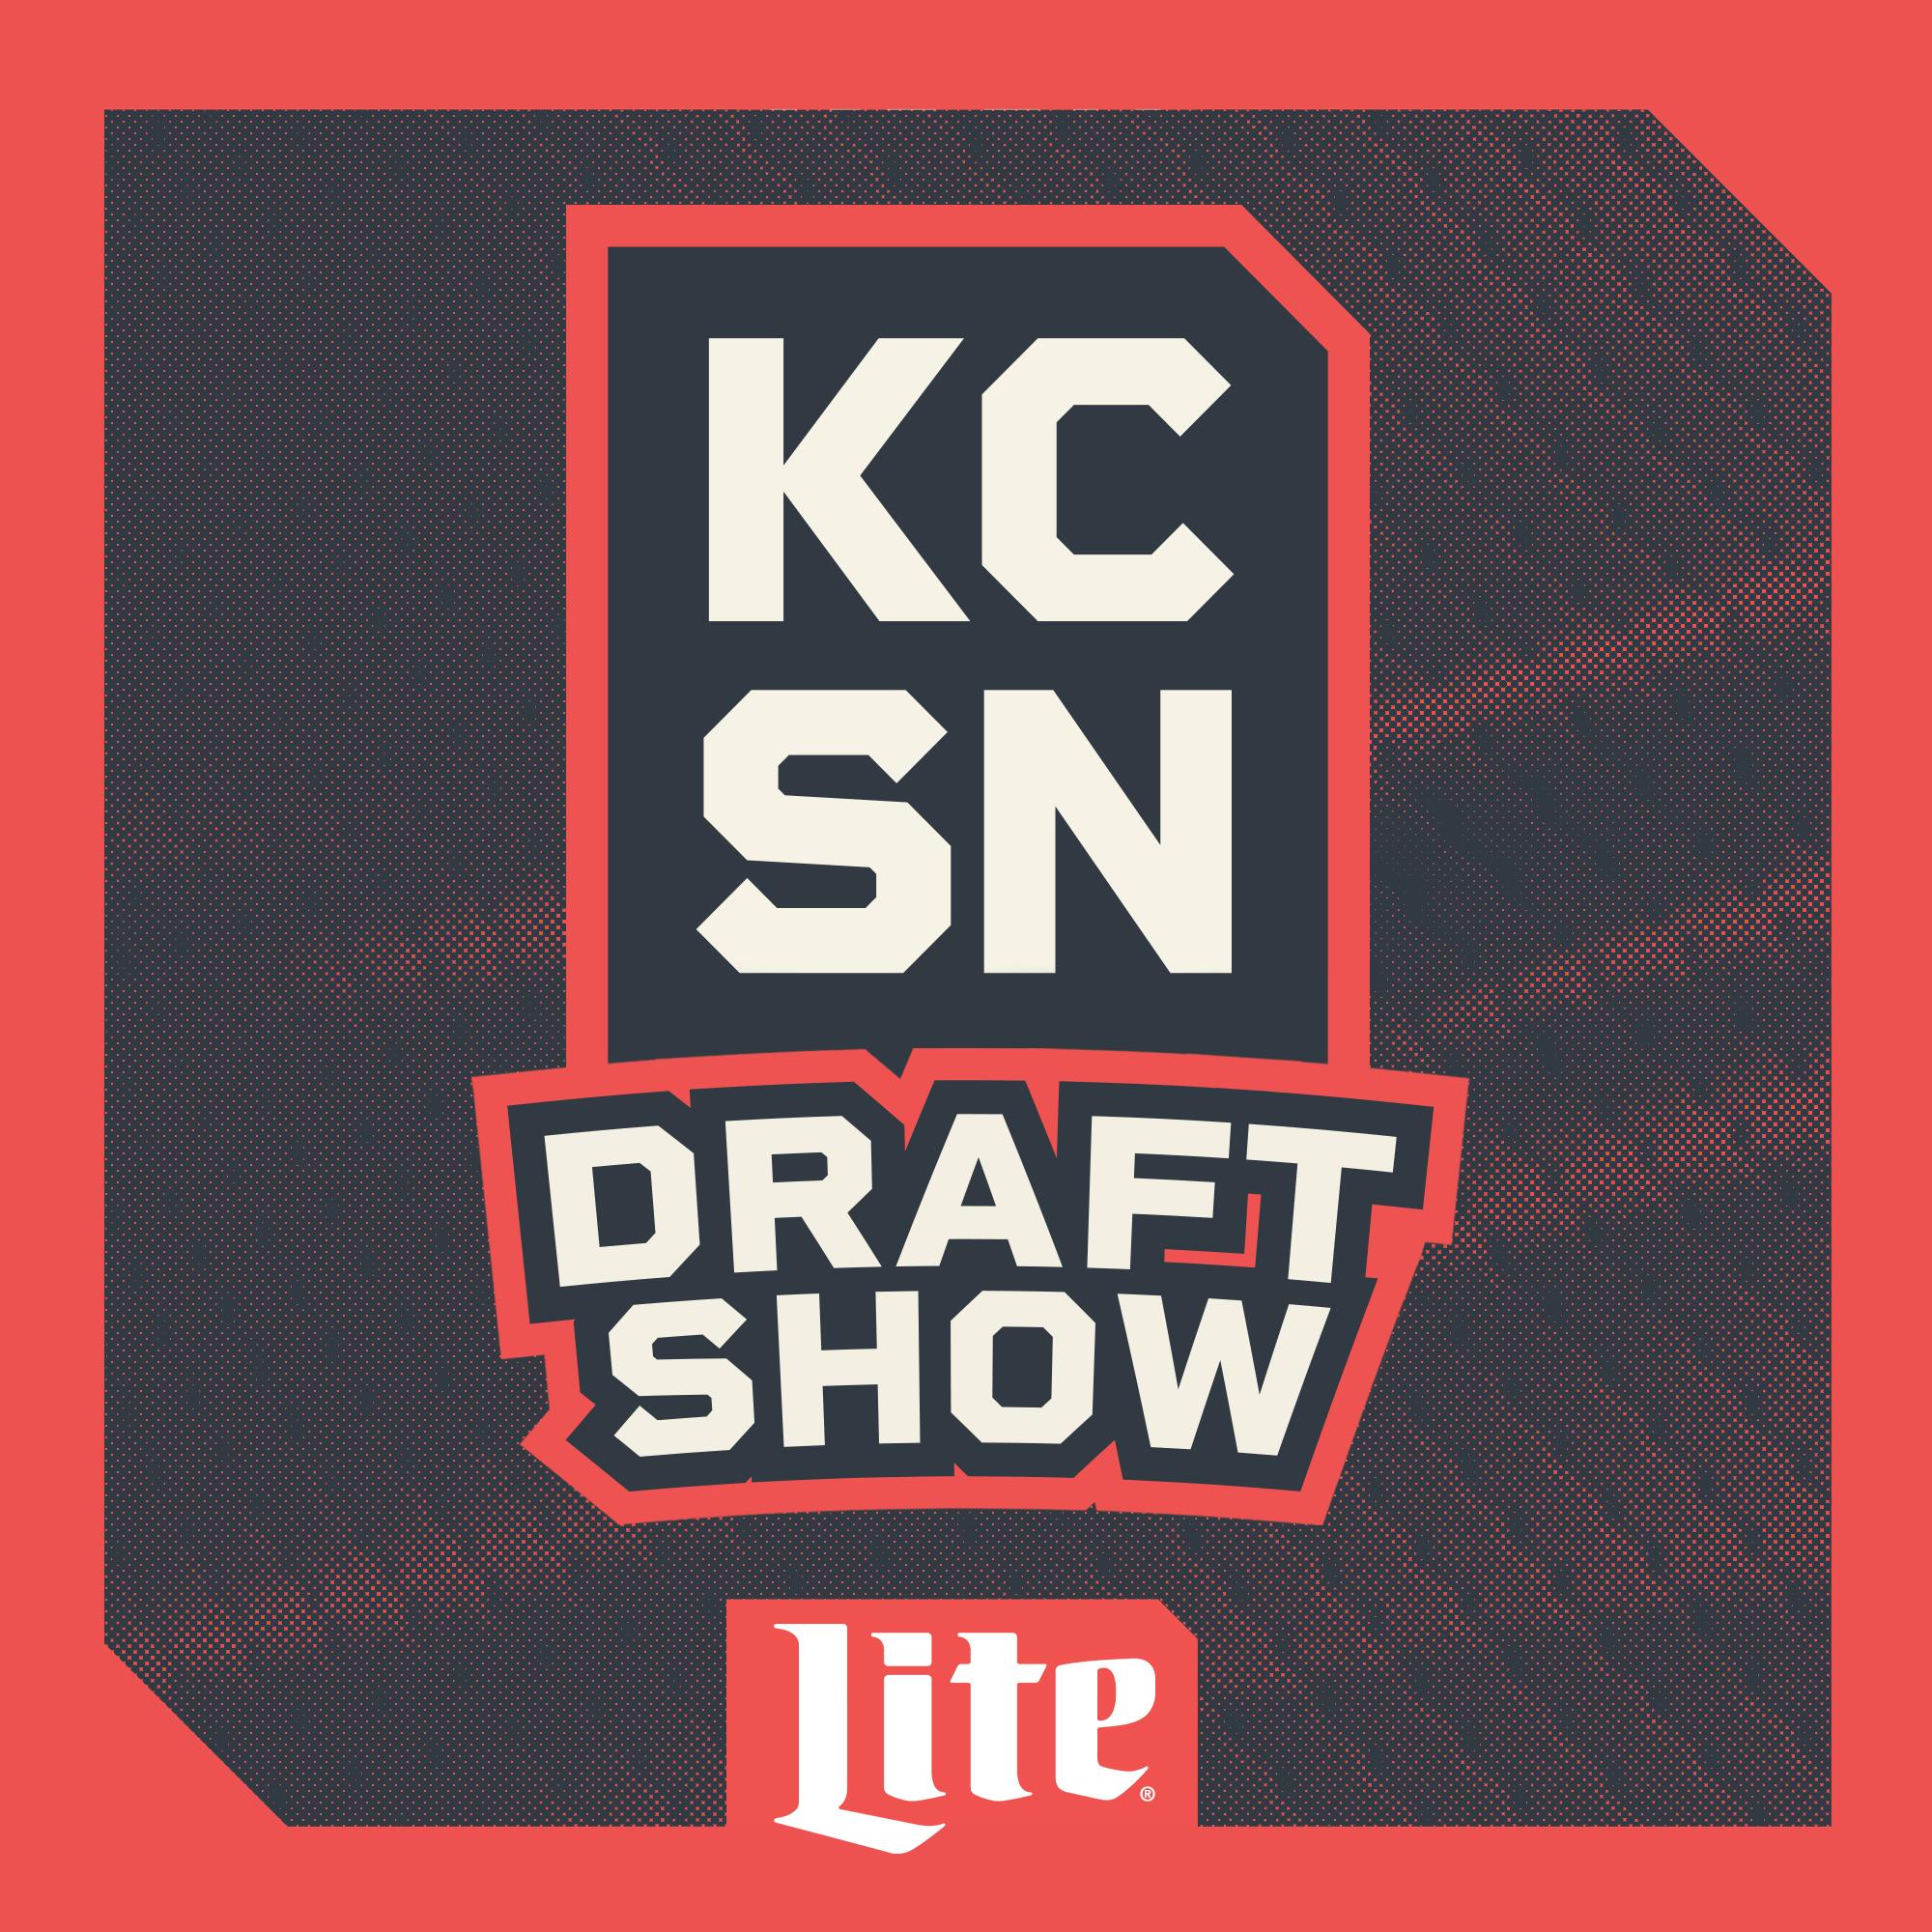 Recapping an Eventful First Round of 2023 NFL Draft | KCSN Draft Show 4/28